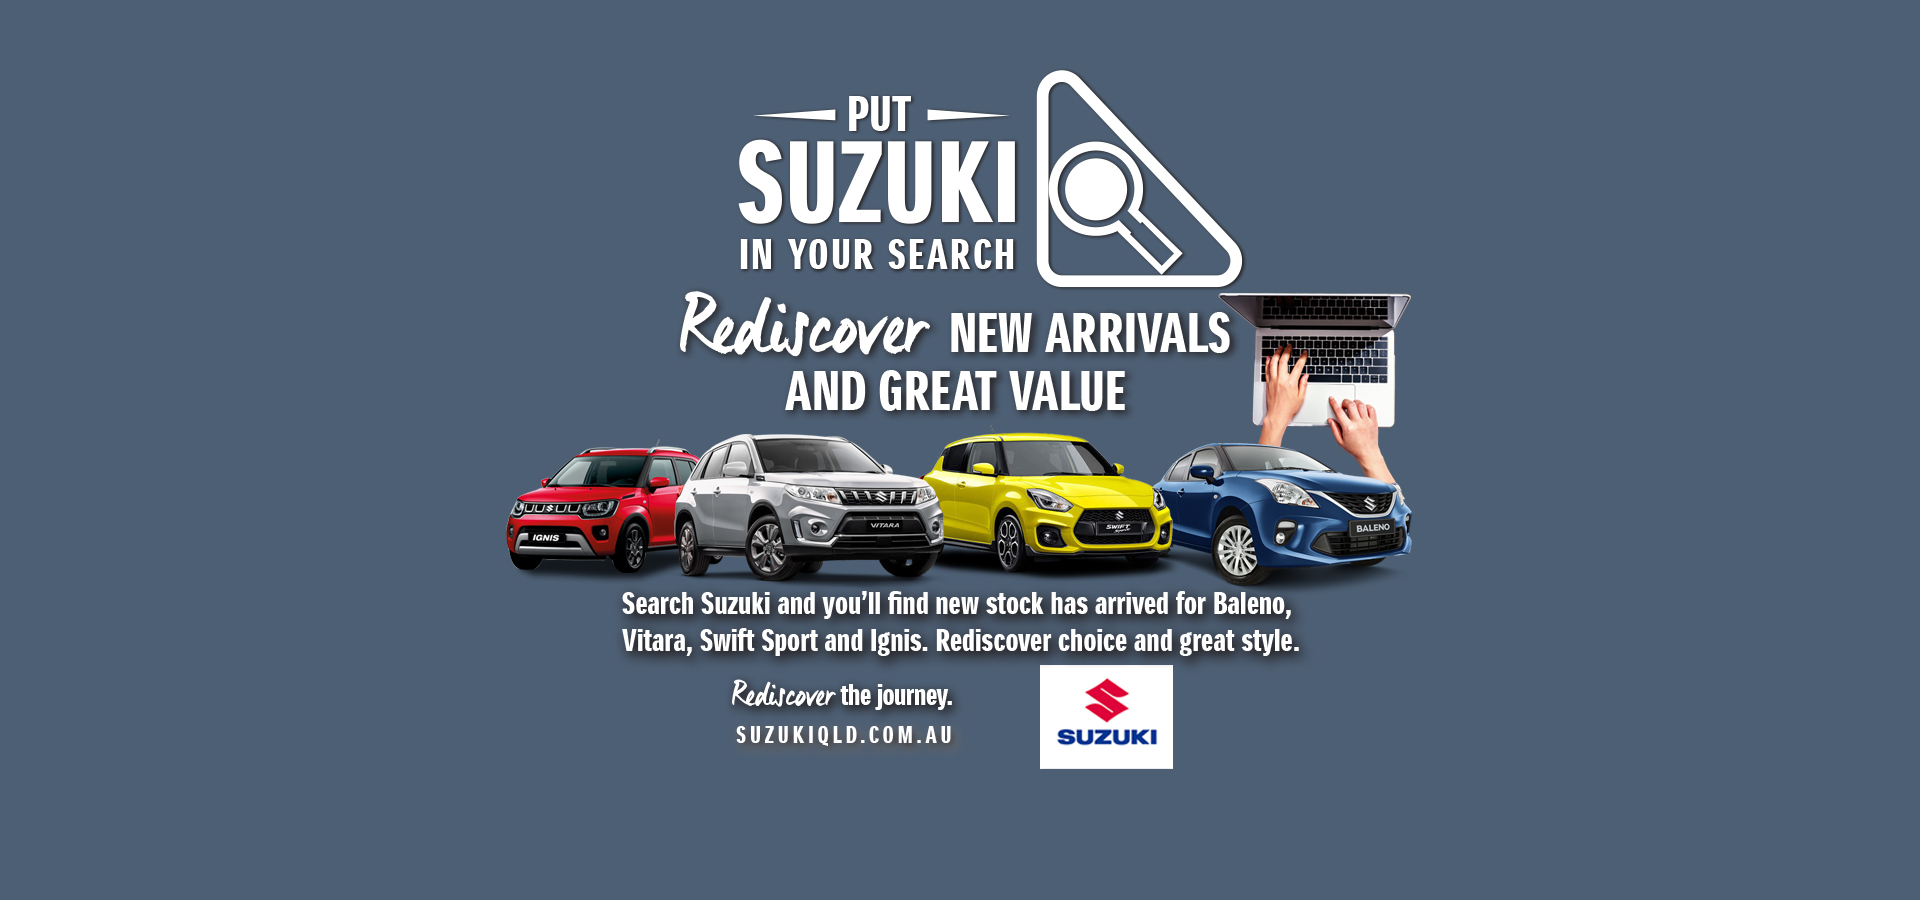 Rediscover new arrivals and great value